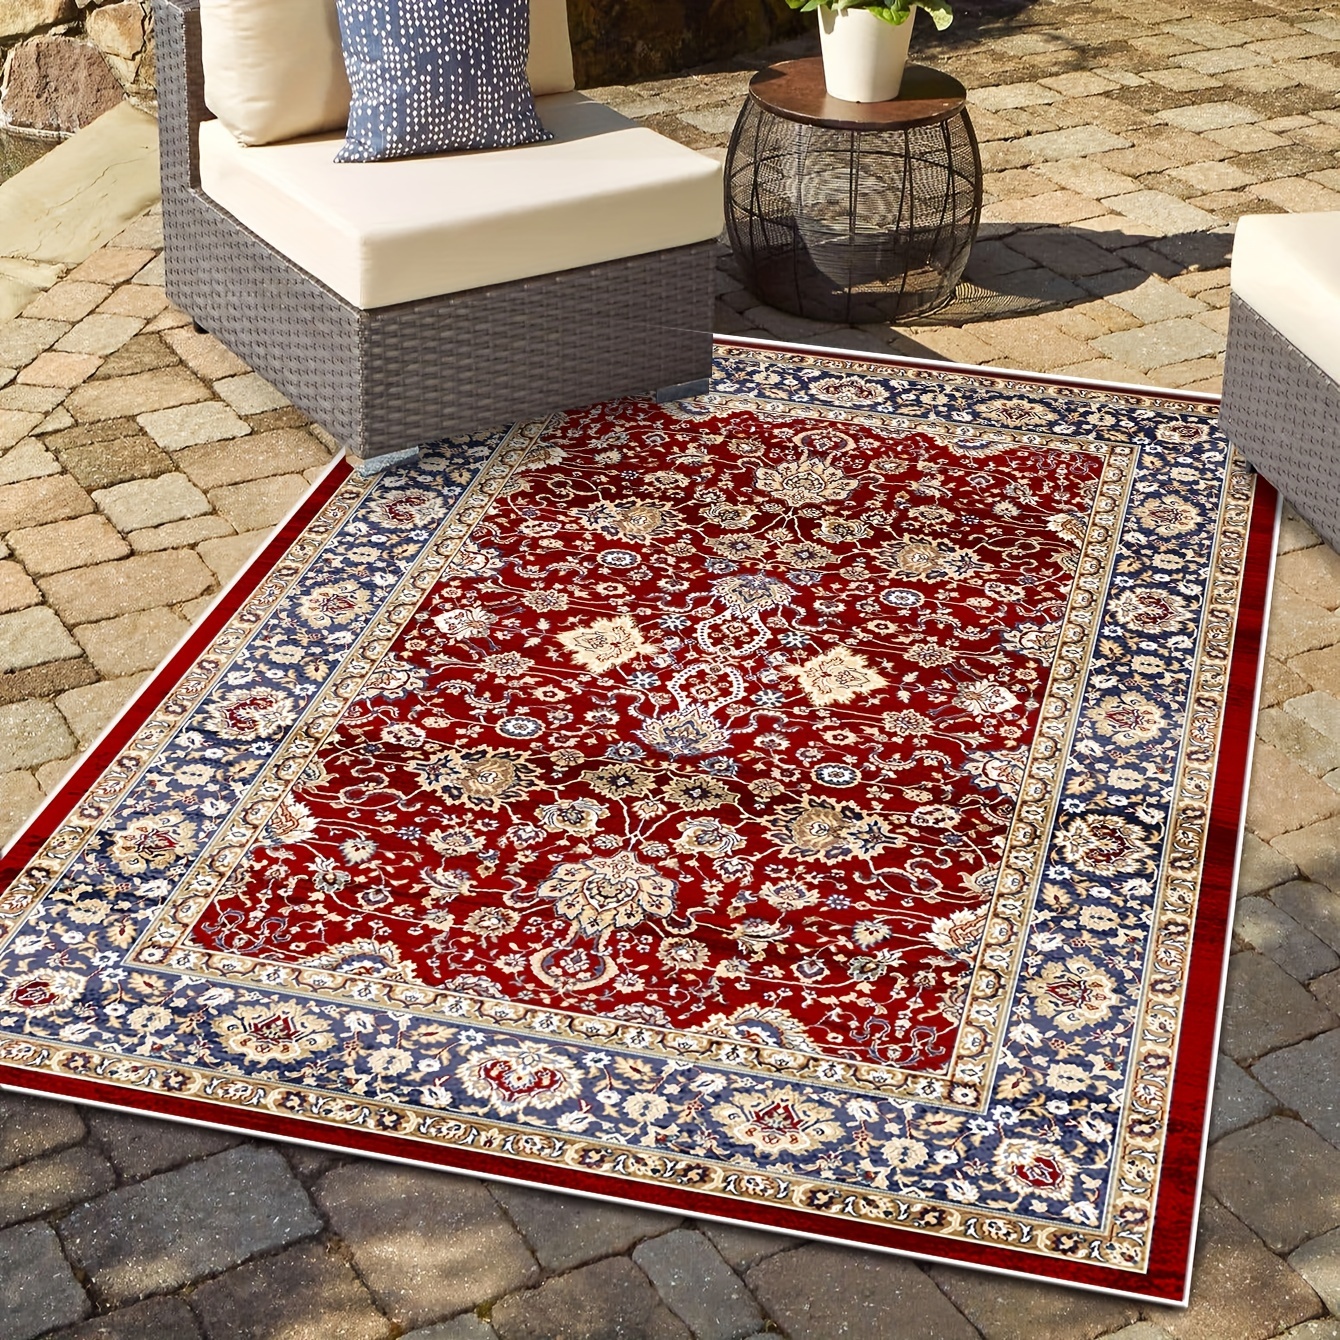 Vintage Outdoor Indoor Area Rug, Anti-slip Boho Persian 2'x 6'/ 5.25'x6'  Outdoor Rugs For Patio Carpet, Soft Foldable Low-pile Carpet For Living  Room Bedroom, Runner Rug Fot Hallway Entryway, Machine Washable, Easy